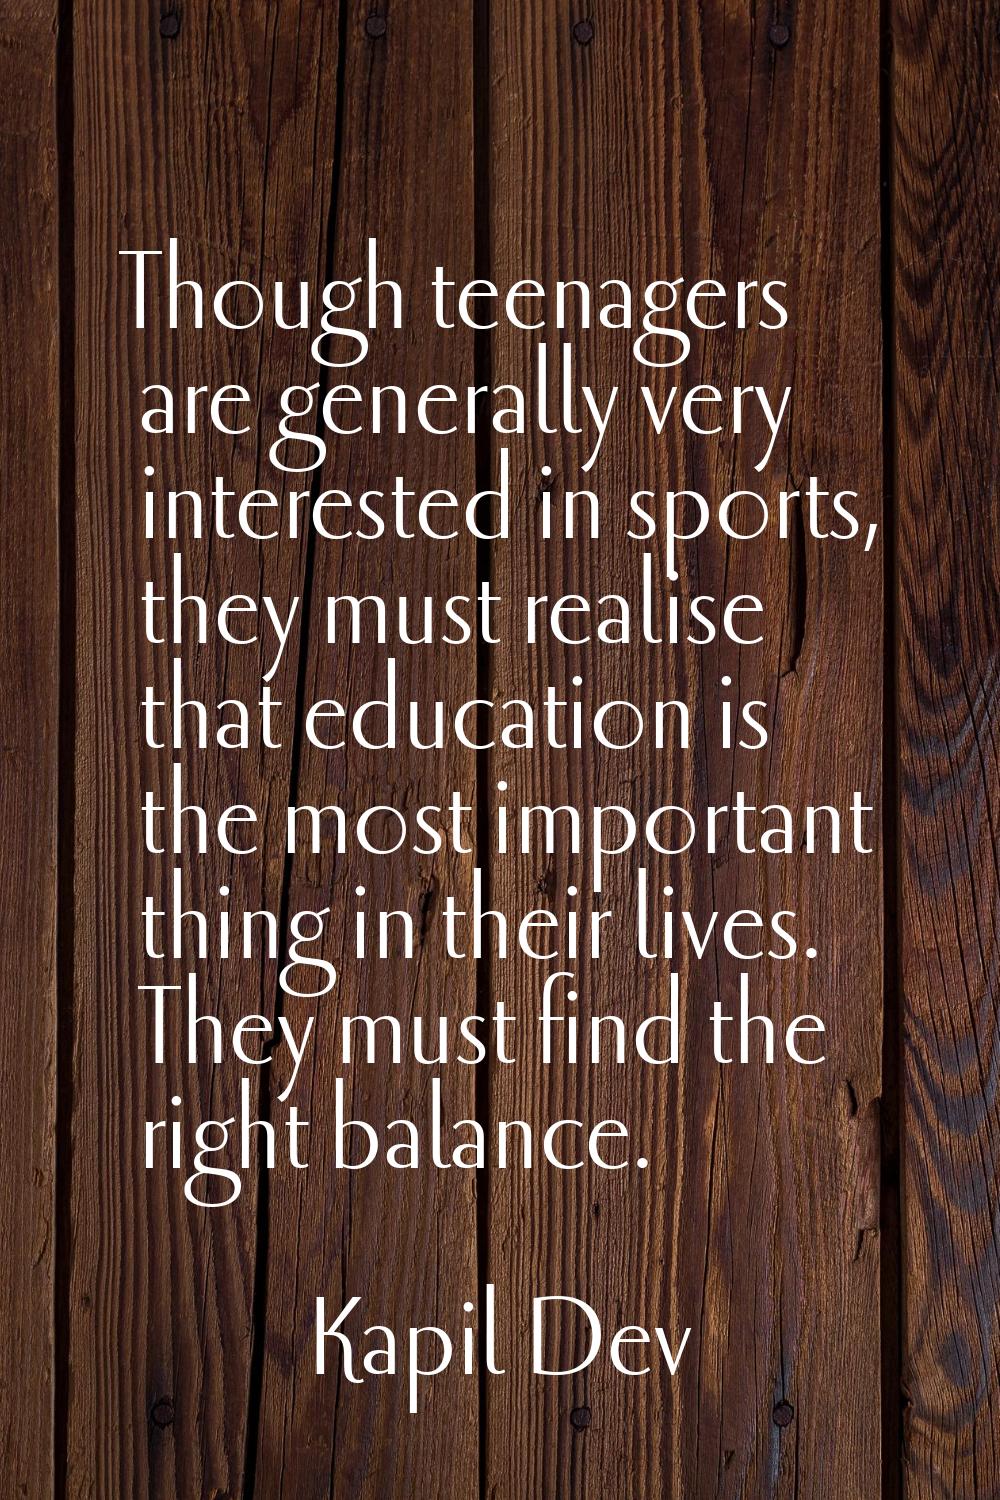 Though teenagers are generally very interested in sports, they must realise that education is the m